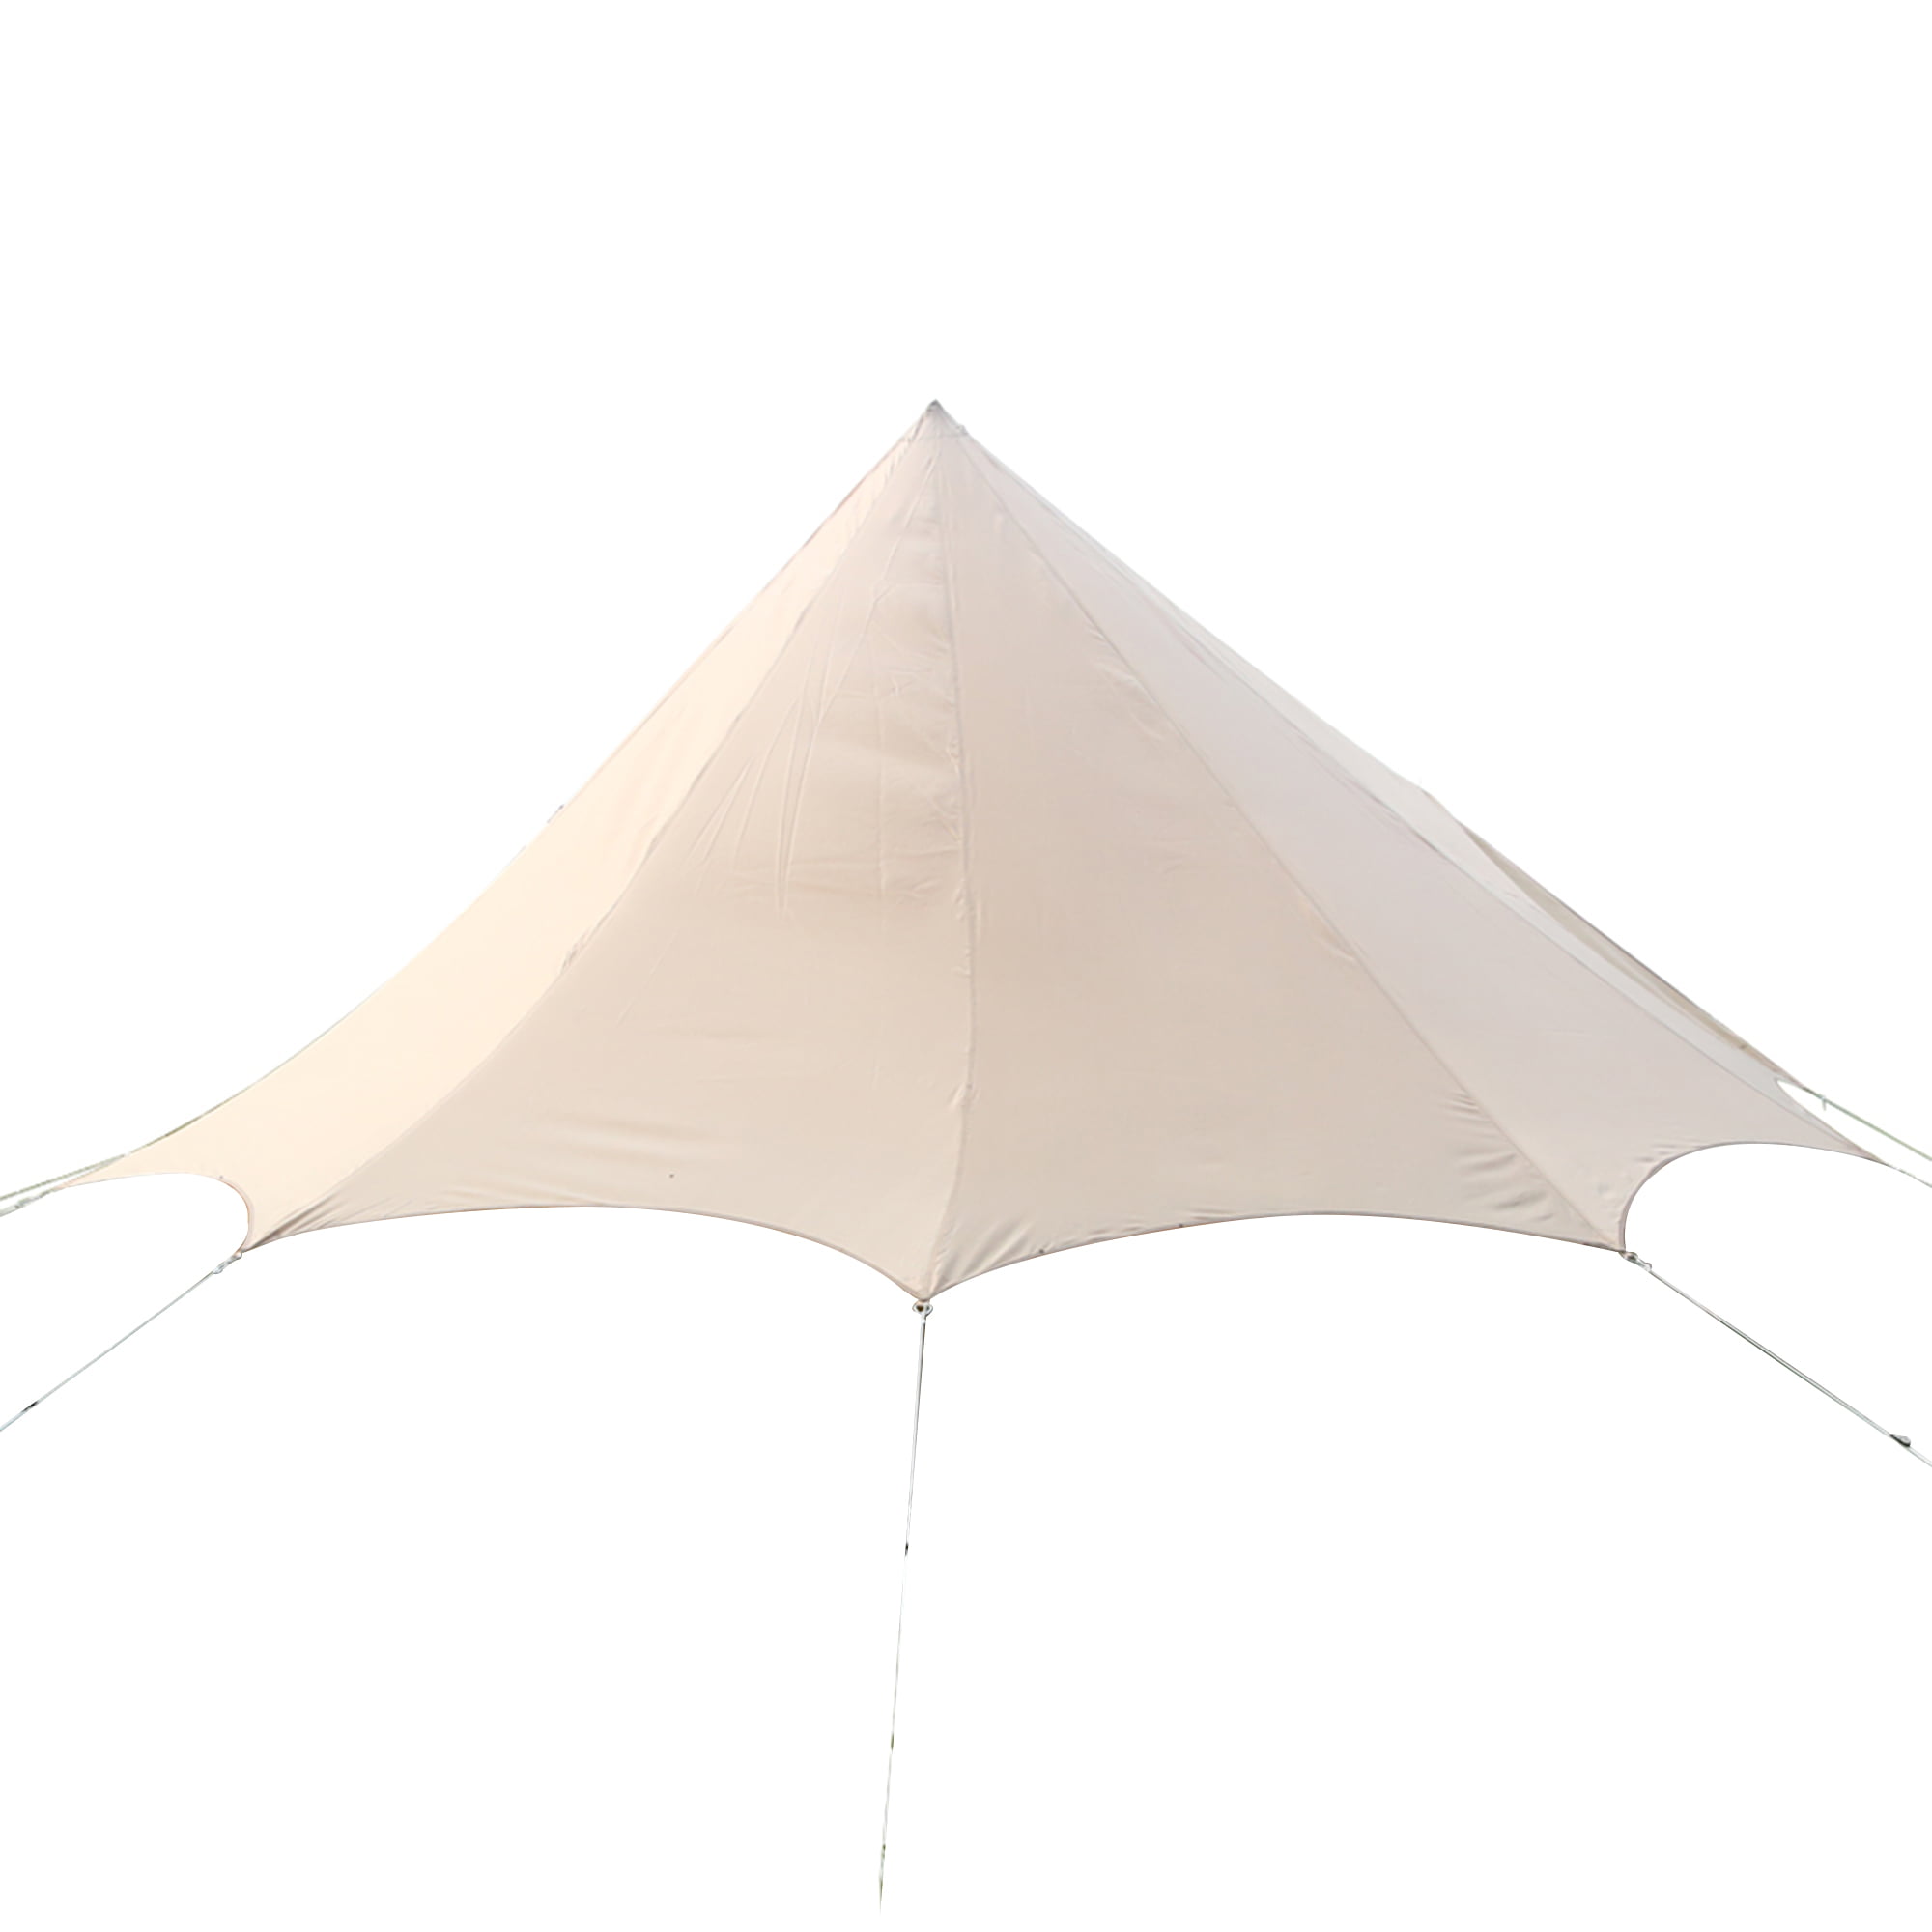 3M 4M 5M 6M 7M Bell Tent Protector Rain Fly Roof Tarp Waterproof Oxford Shelter 